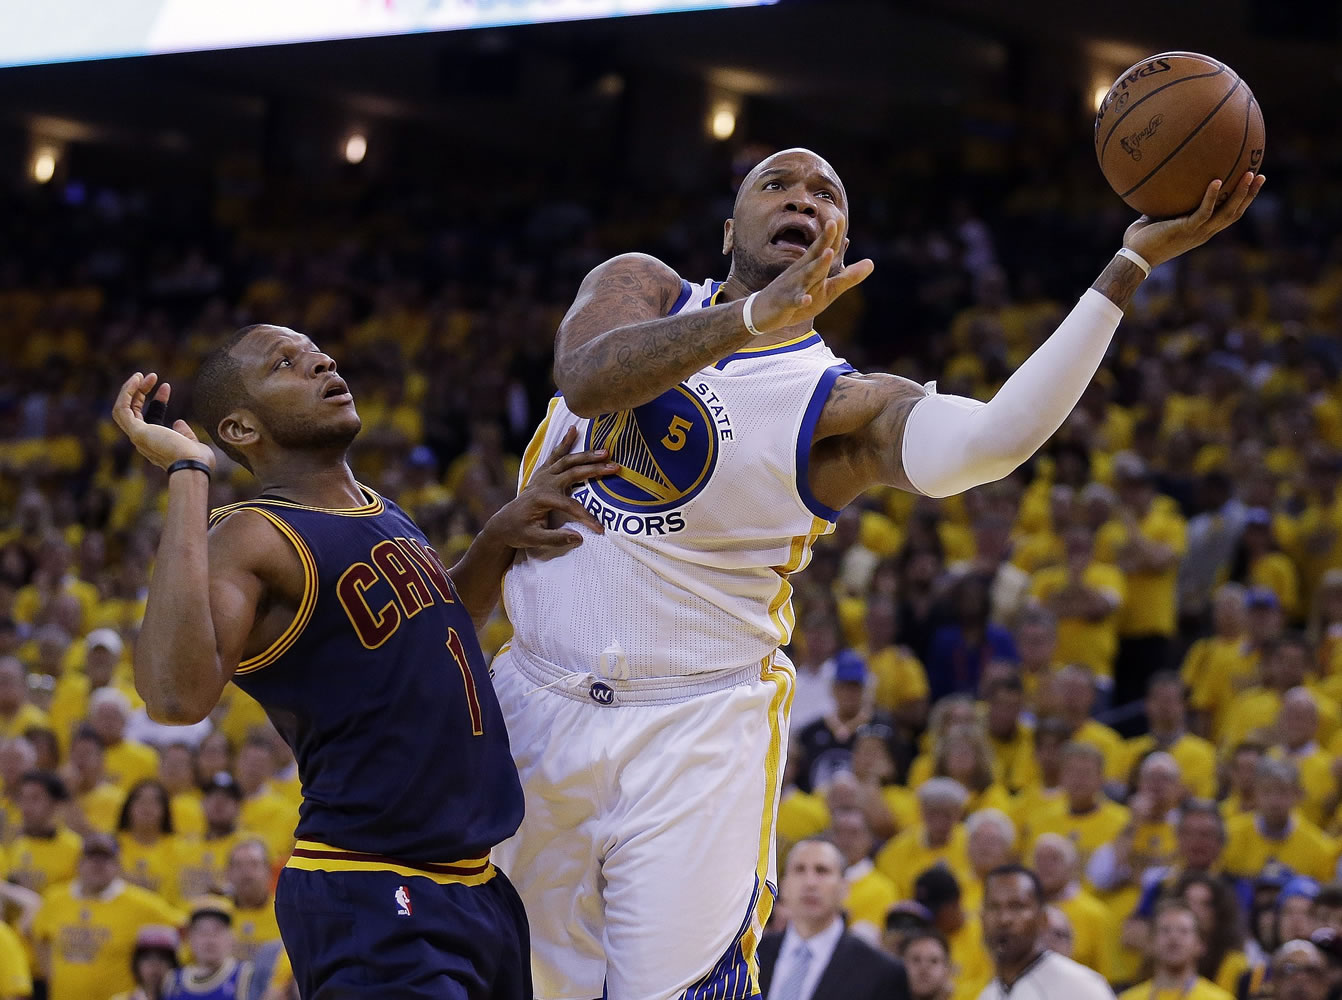 Golden State Warriors forward Marreese Speights (5) shoots against Cleveland Cavaliers forward James Jones (1) during the second half of Game 1 of the NBA Finals in Oakland, Calif.